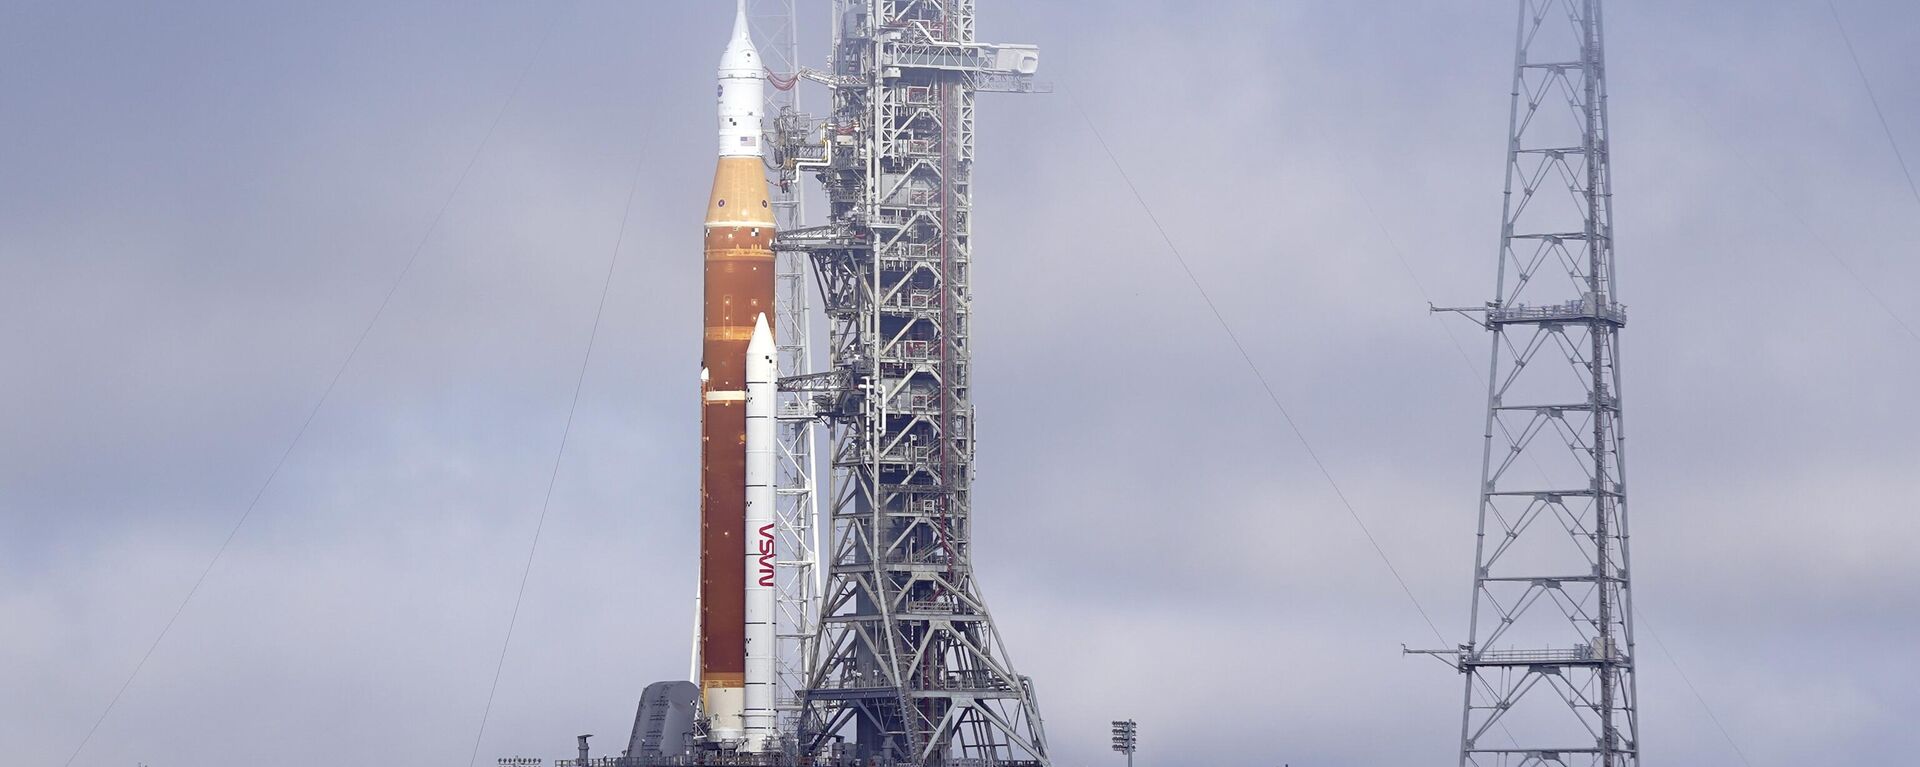 The NASA Artemis rocket with the Orion spacecraft aboard stands on pad 39B at the Kennedy Space Center in Cape Canaveral, Fla., Friday, March 18, 2022. NASA is kicking off a critical countdown test for its new moon rocket. The two-day dress rehearsal began Friday, April 1, 2022 at Florida's Kennedy Space Center and will culminate Sunday with the loading of the rocket's fuel tanks. - Sputnik International, 1920, 07.04.2022